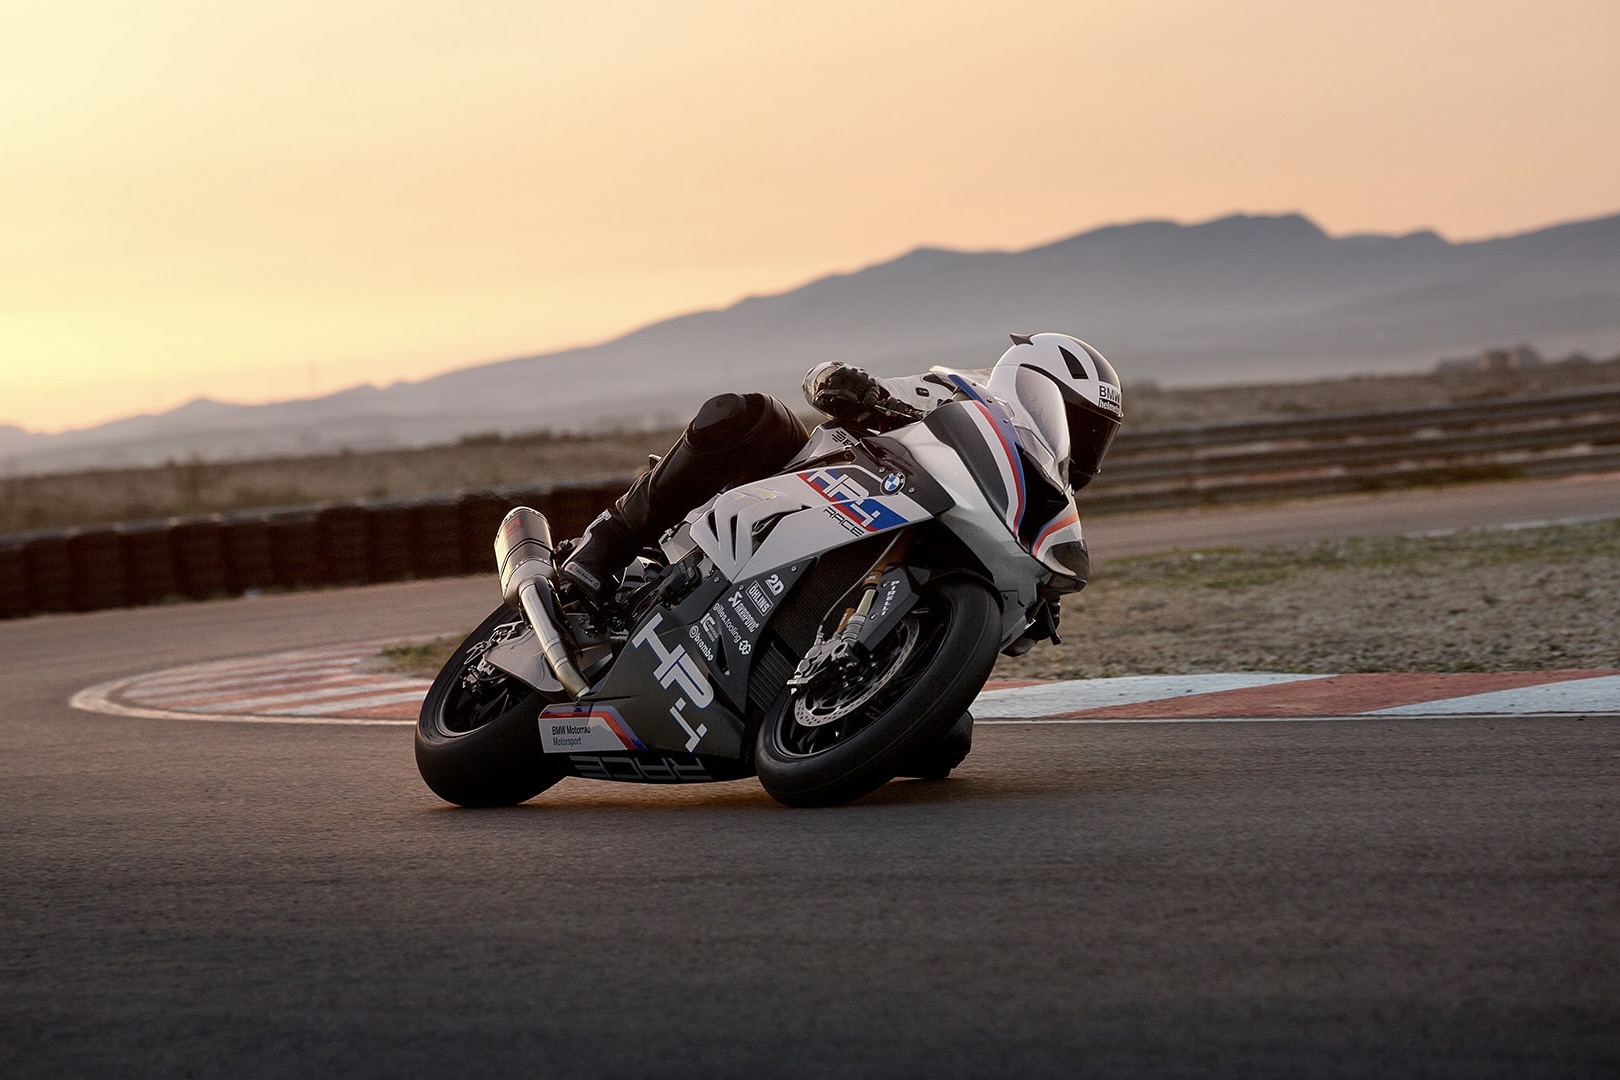 Ride taking the BMW HP4 Race around a track with mountains in the back.